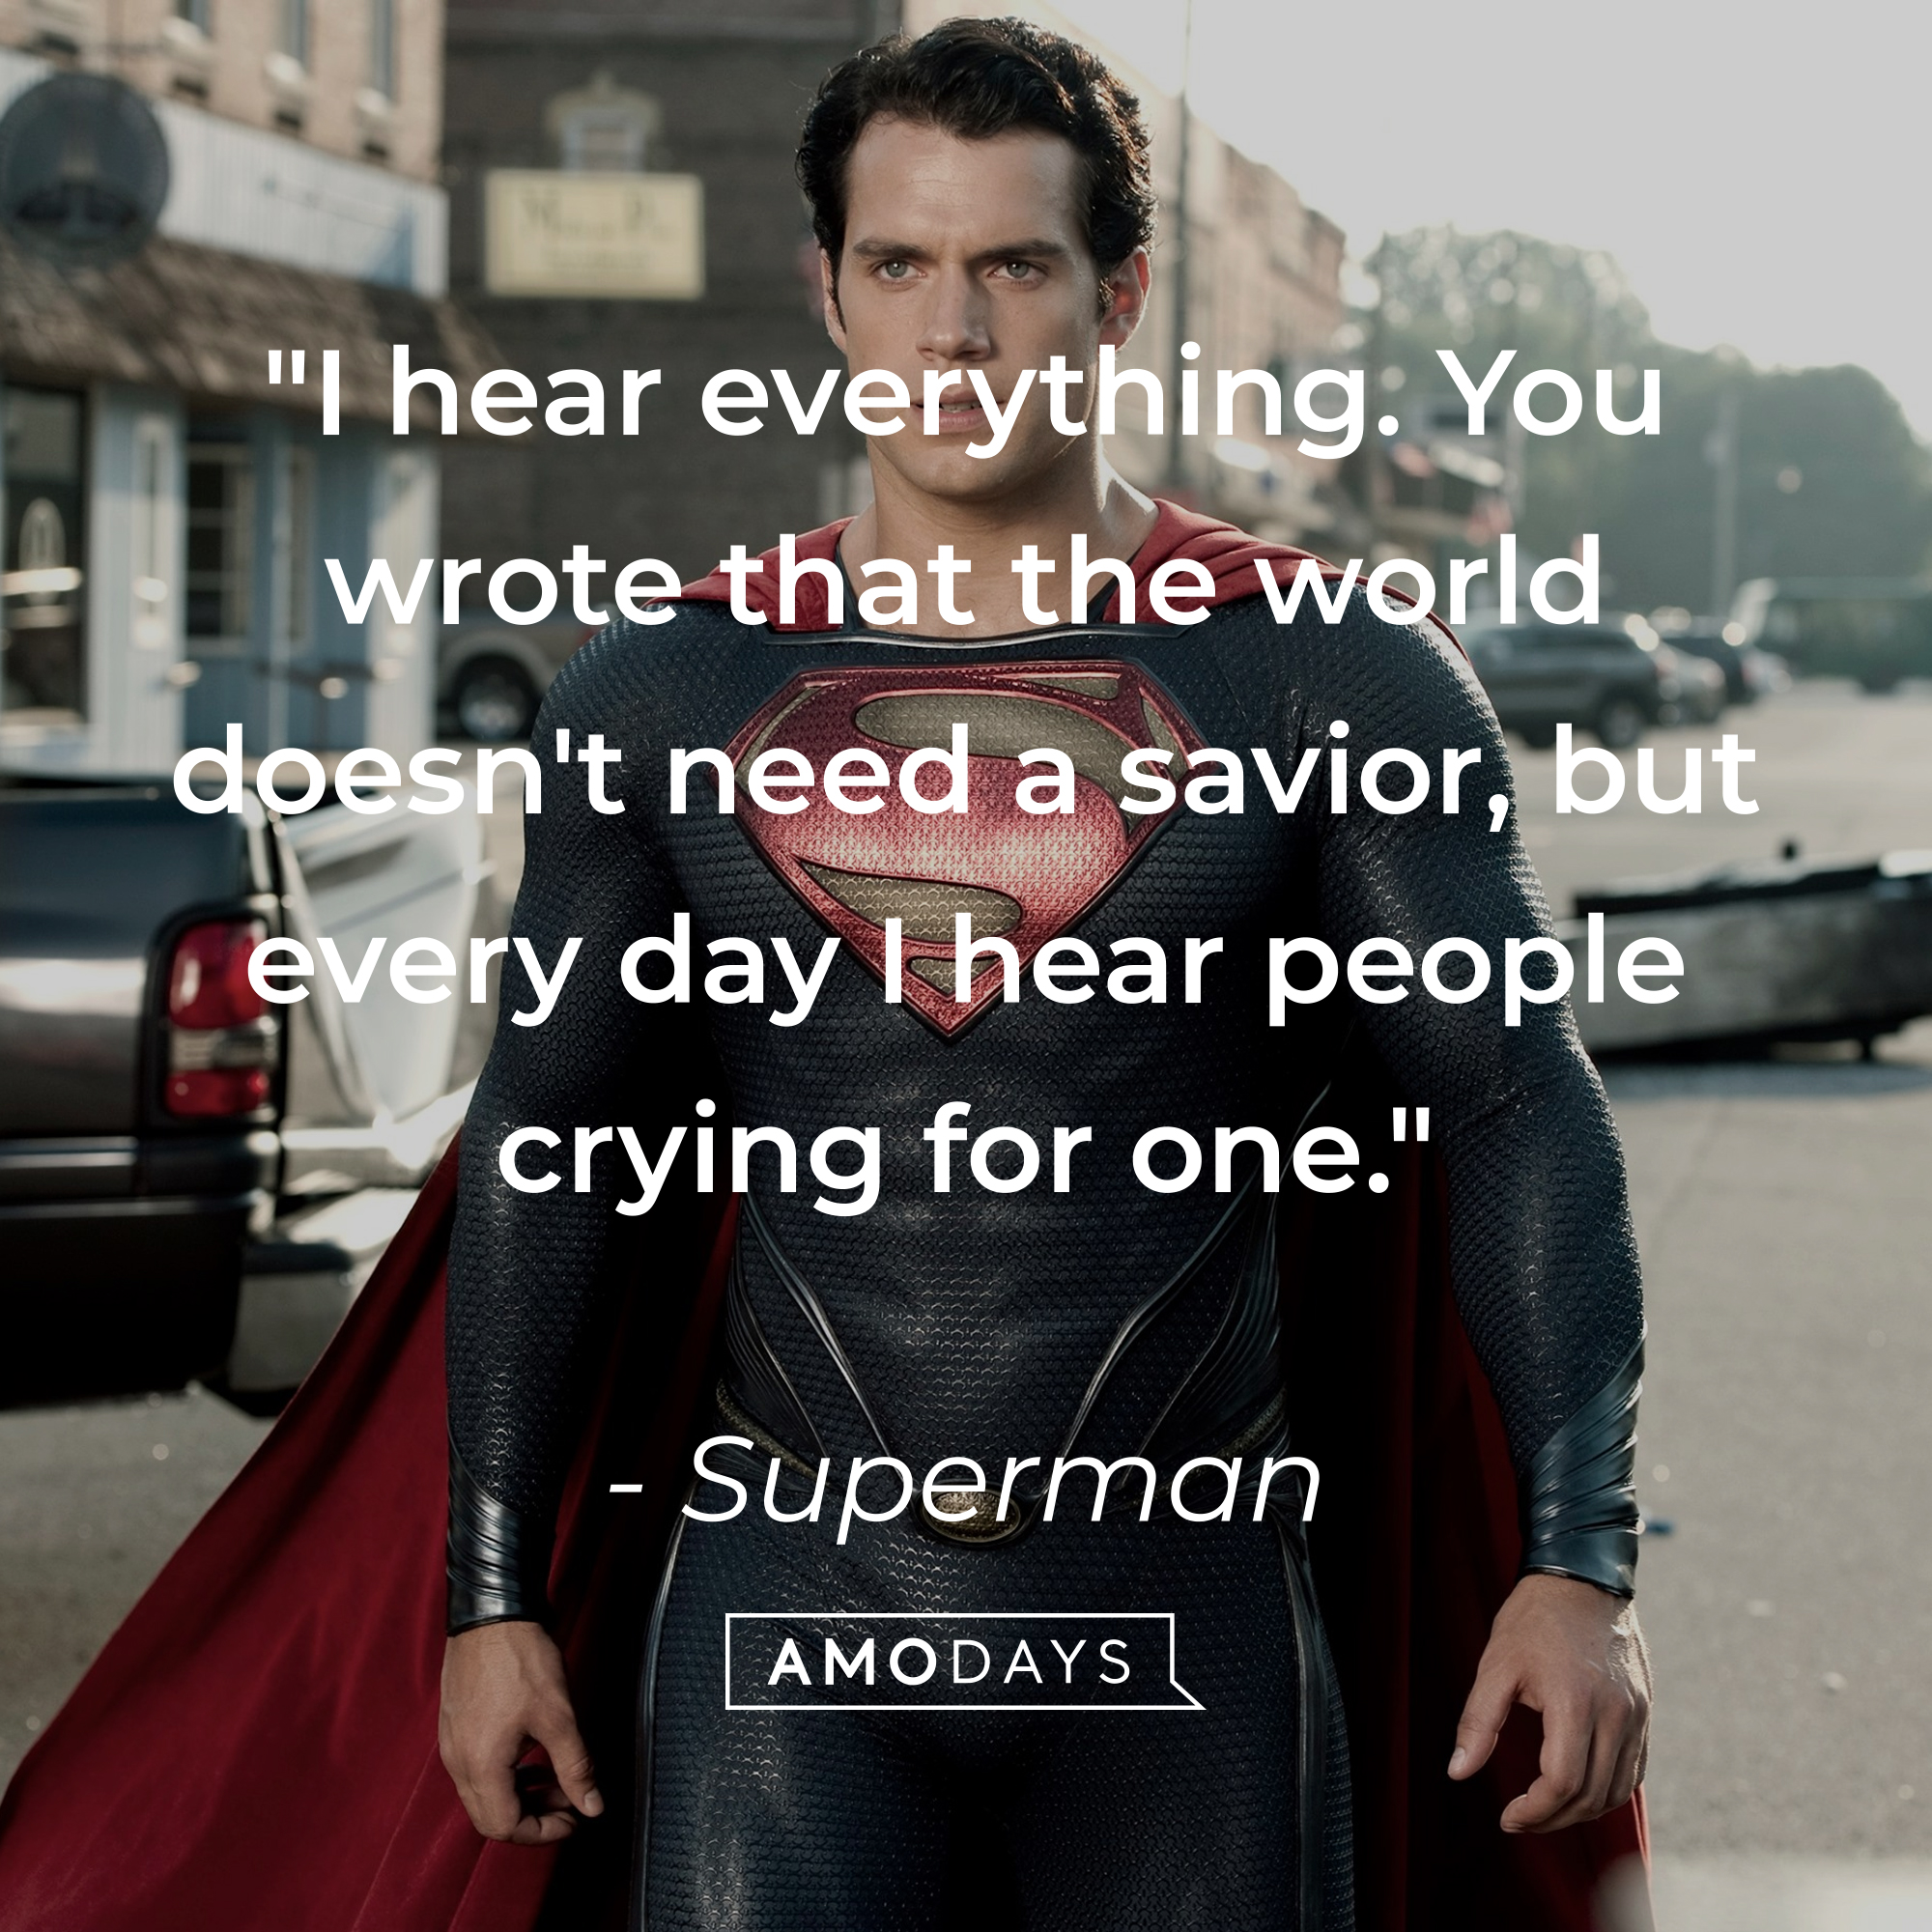 Superman’s quote: "I hear everything. You wrote that the world doesn't need a savior, but every day I hear people crying for one." | Source: Facebook/manofsteel